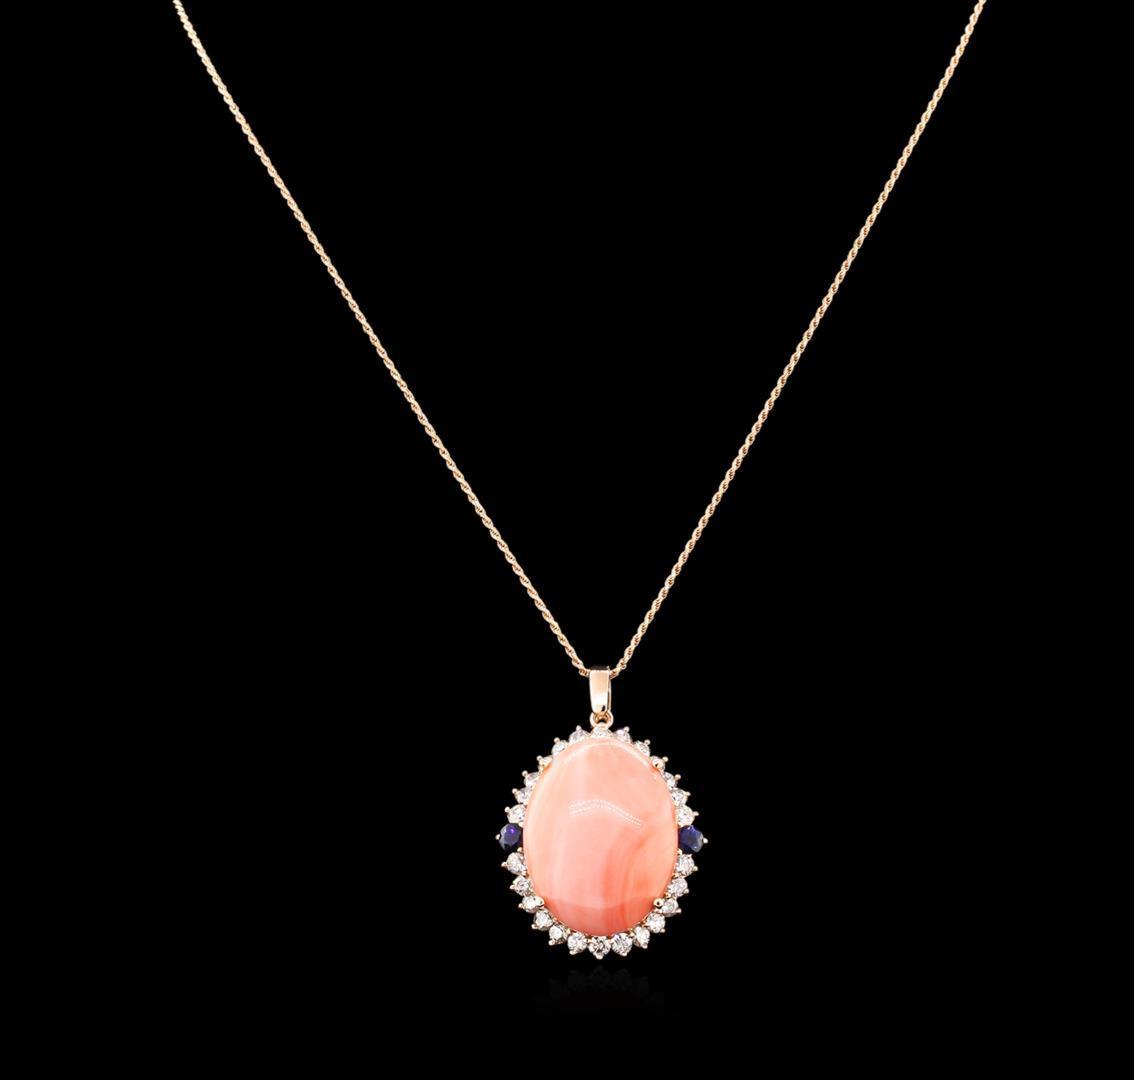 32.06 ctw Pink Coral, Sapphire, and Diamond Pendant With Chain - 14KT Rose Gold